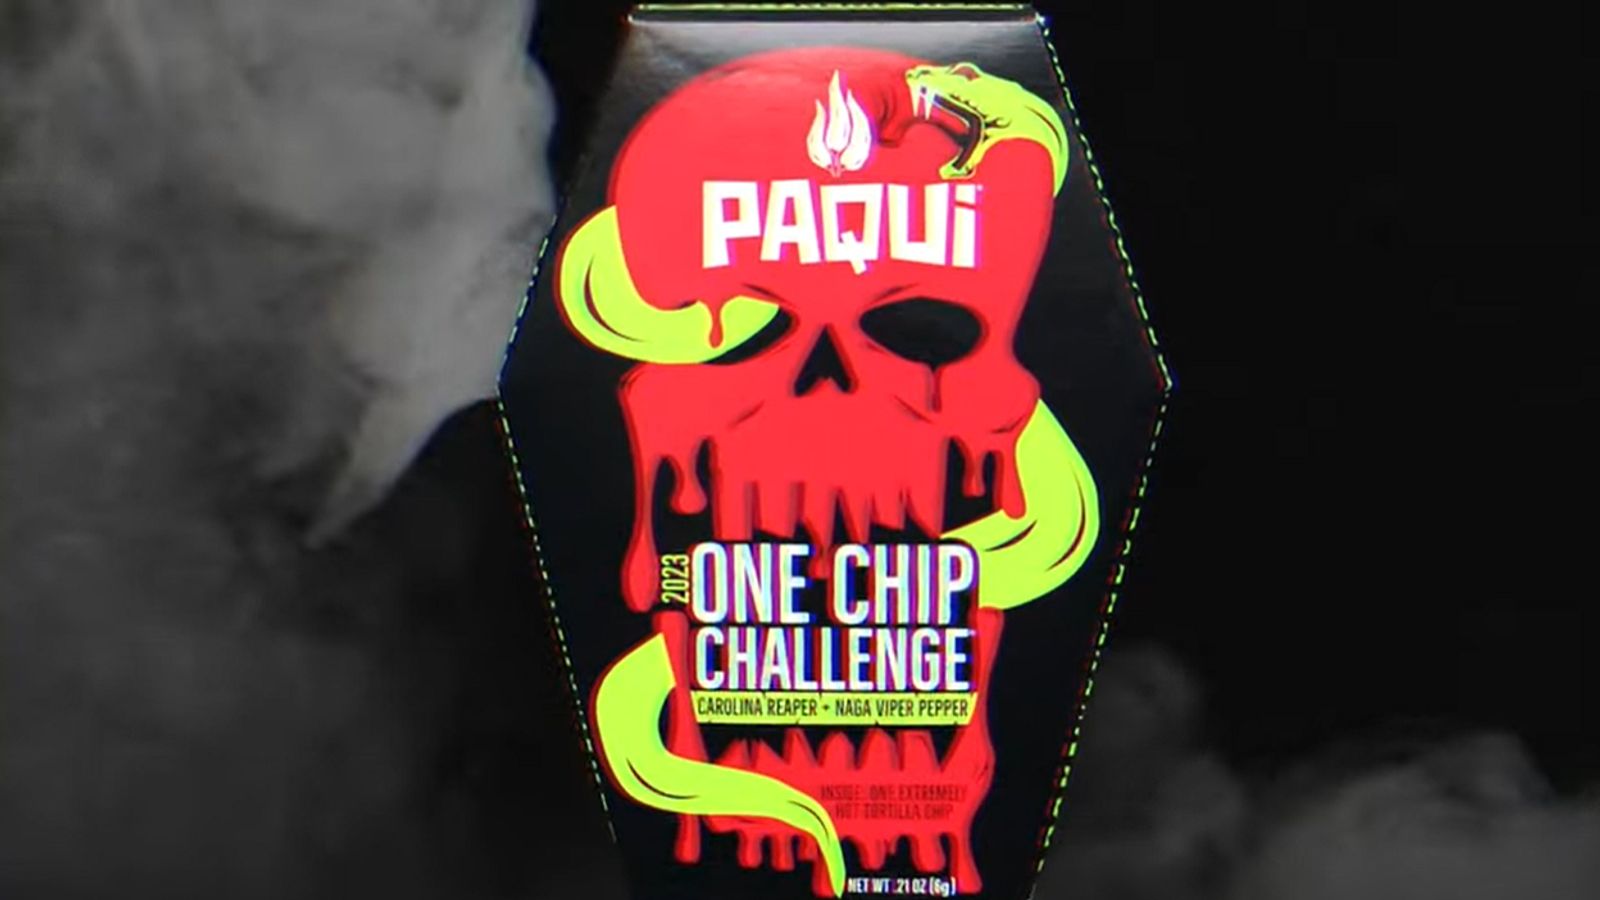 One Chip Challenge being pulled from shelves after death of teen, US News